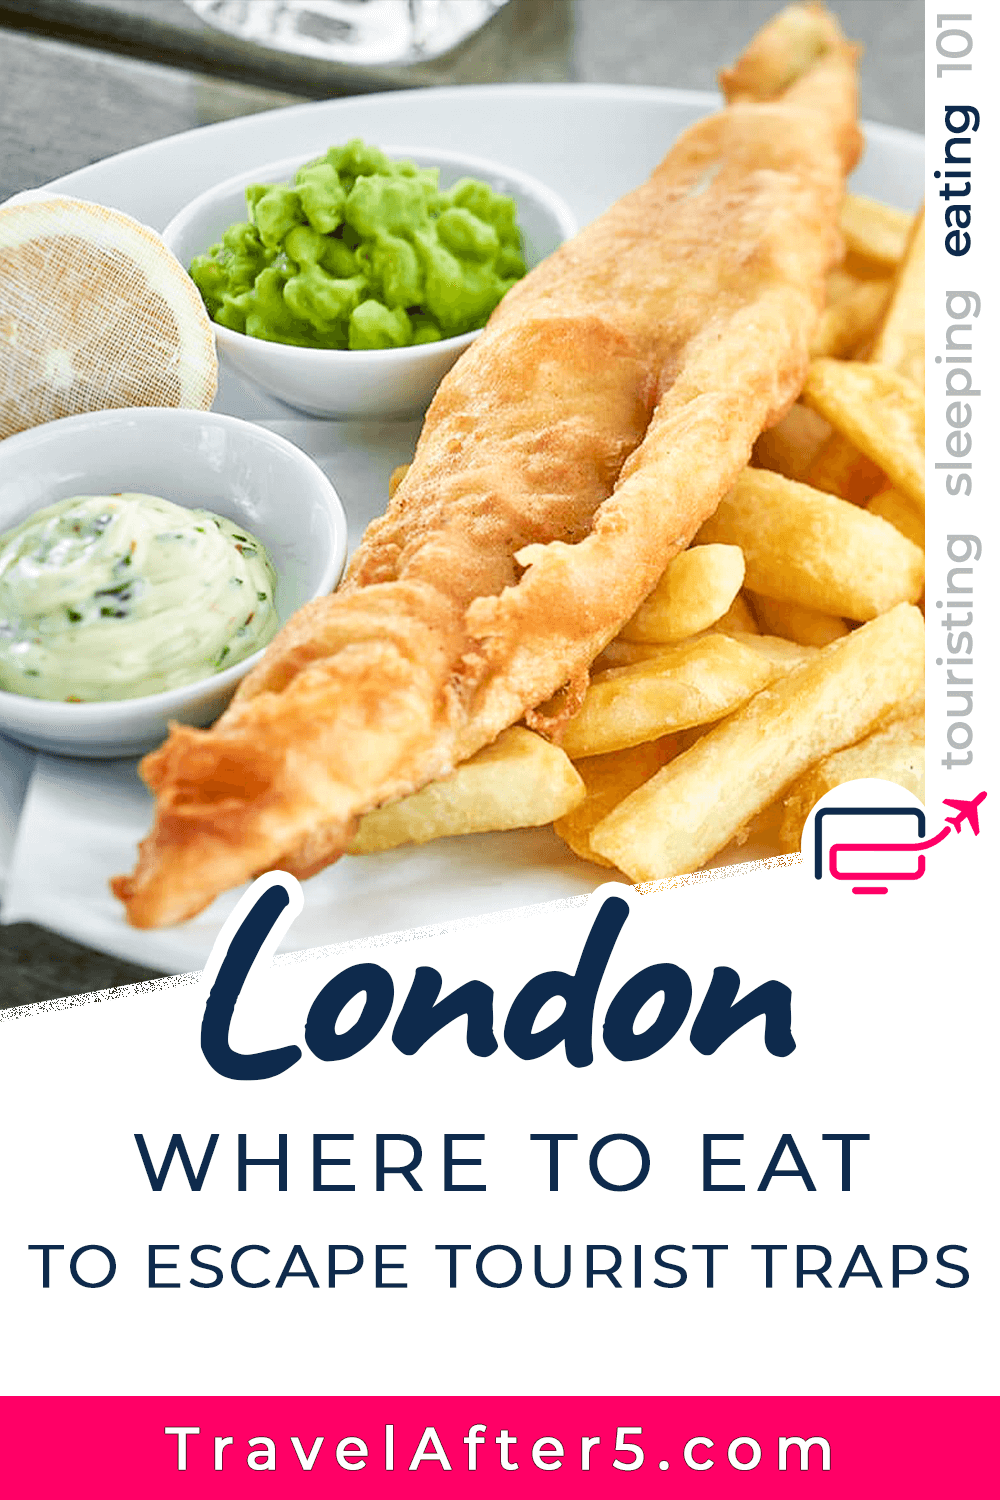 Pinterest Pin to Eating in London, by Travel After 5